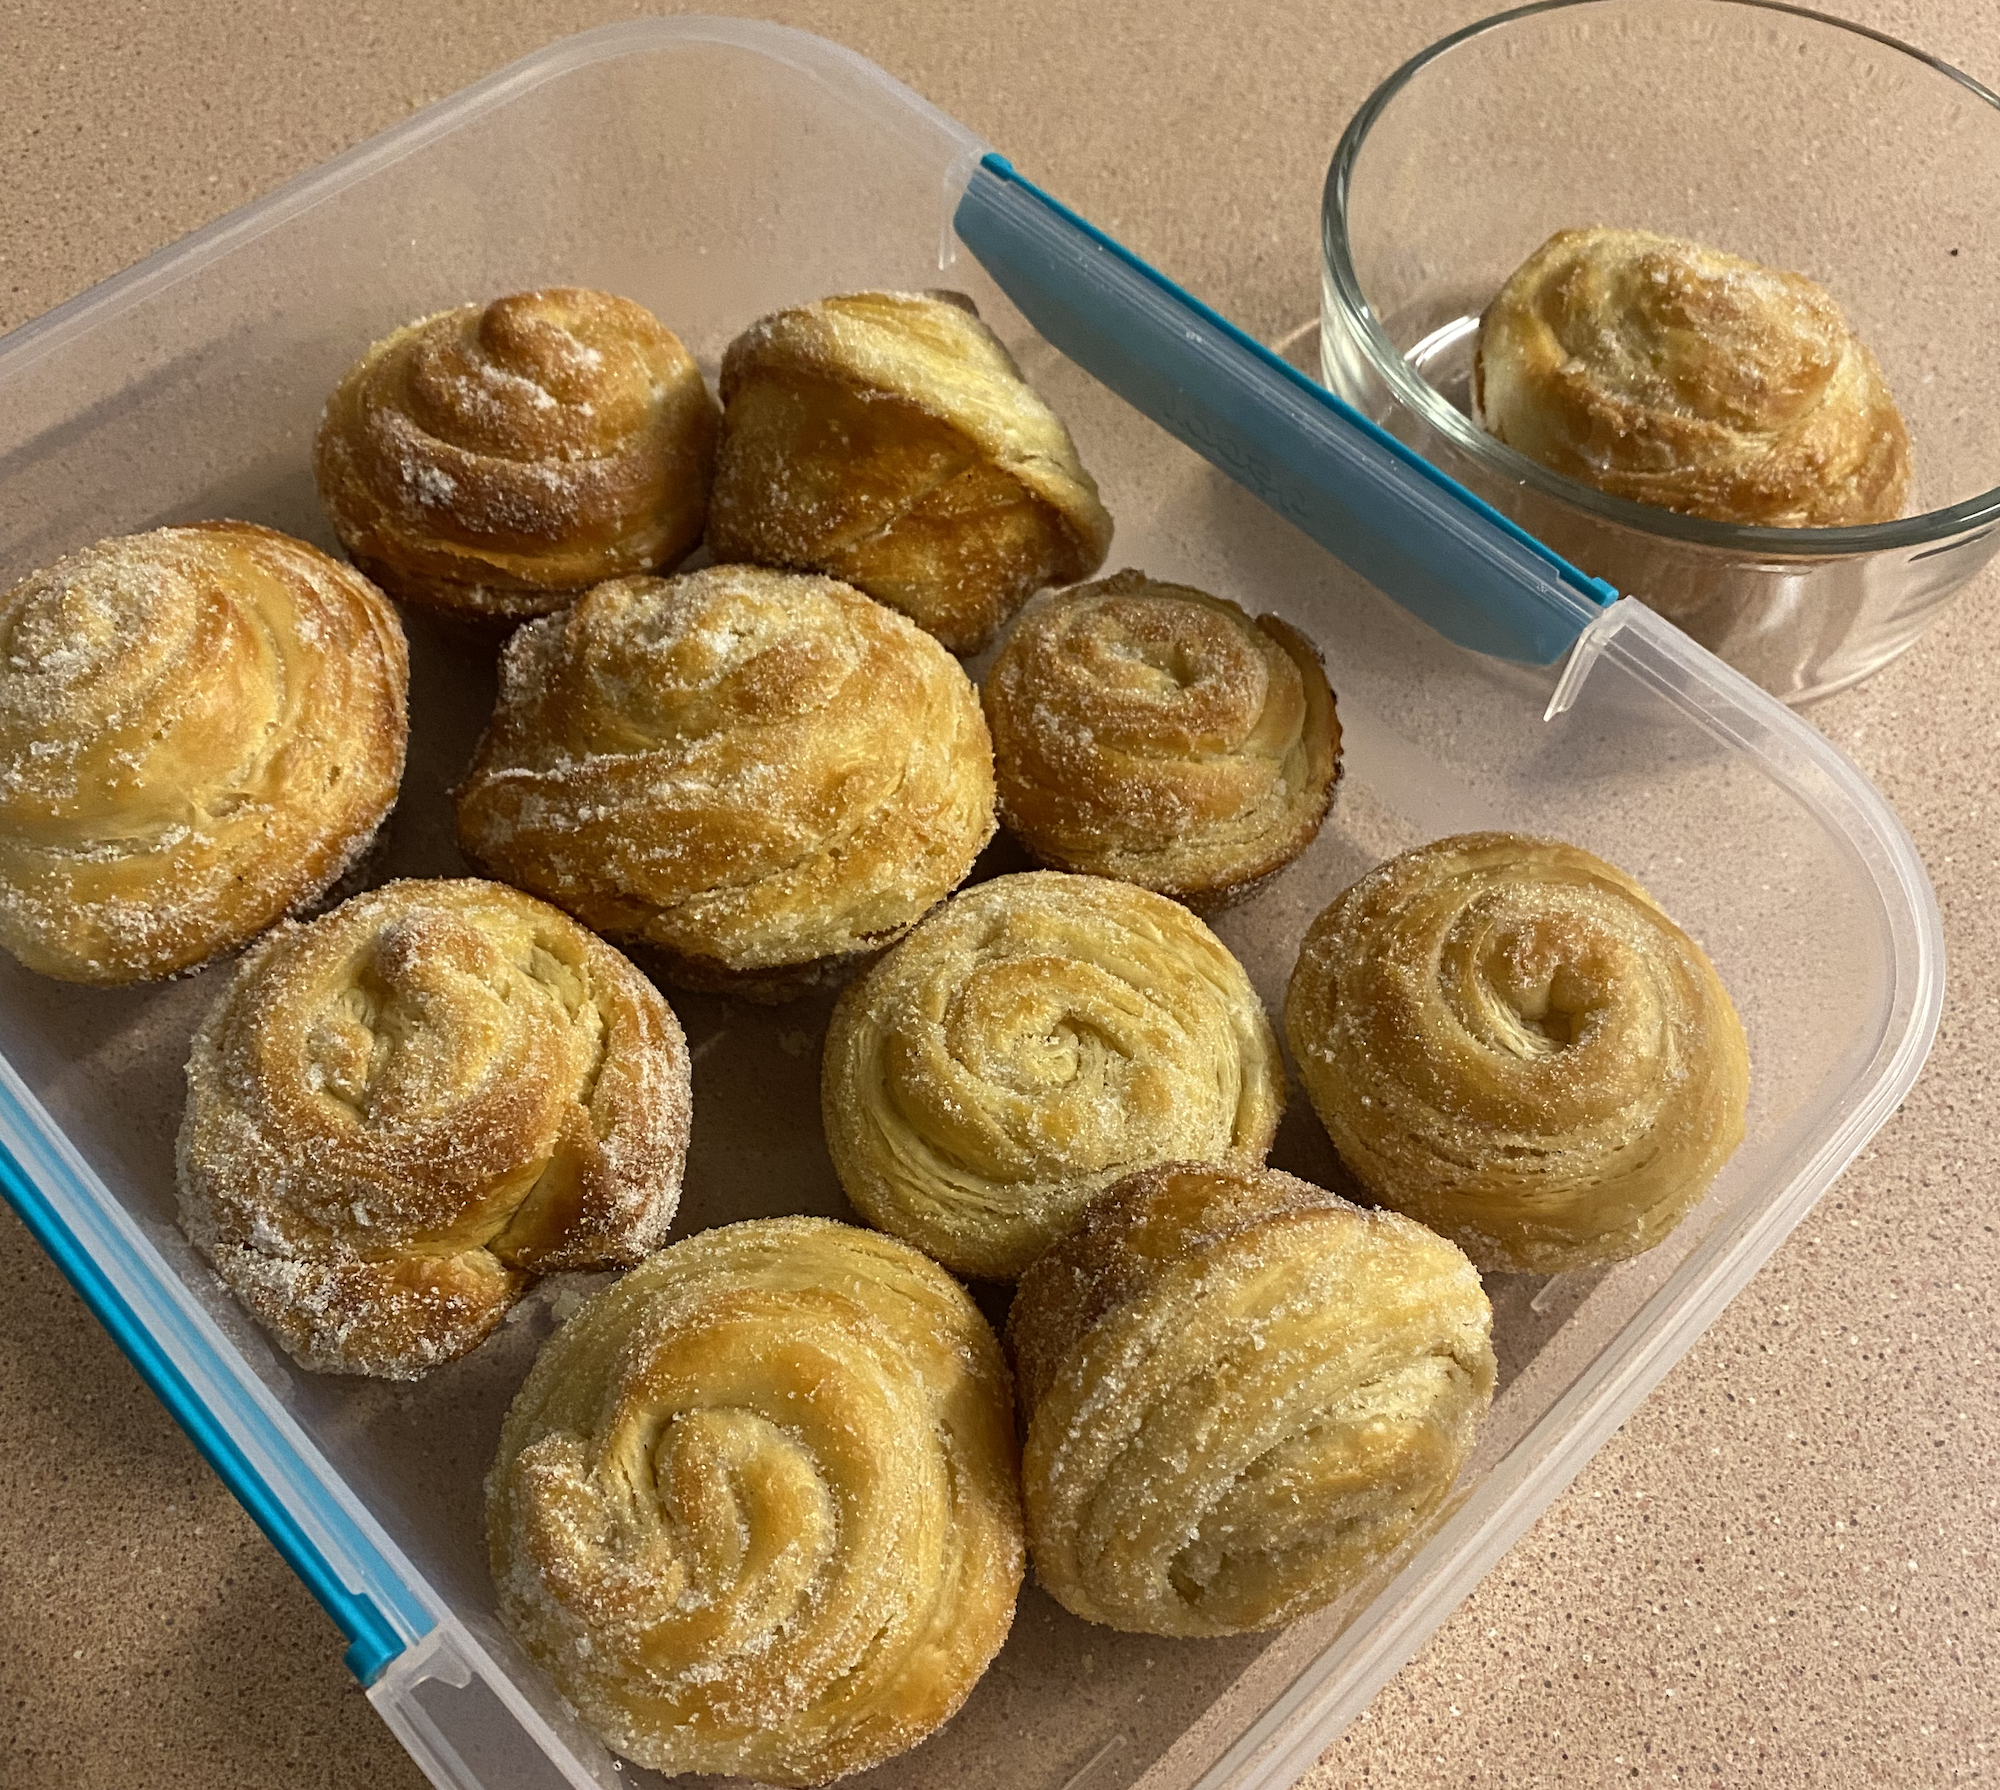 First batch of dough, lime curd cruffins